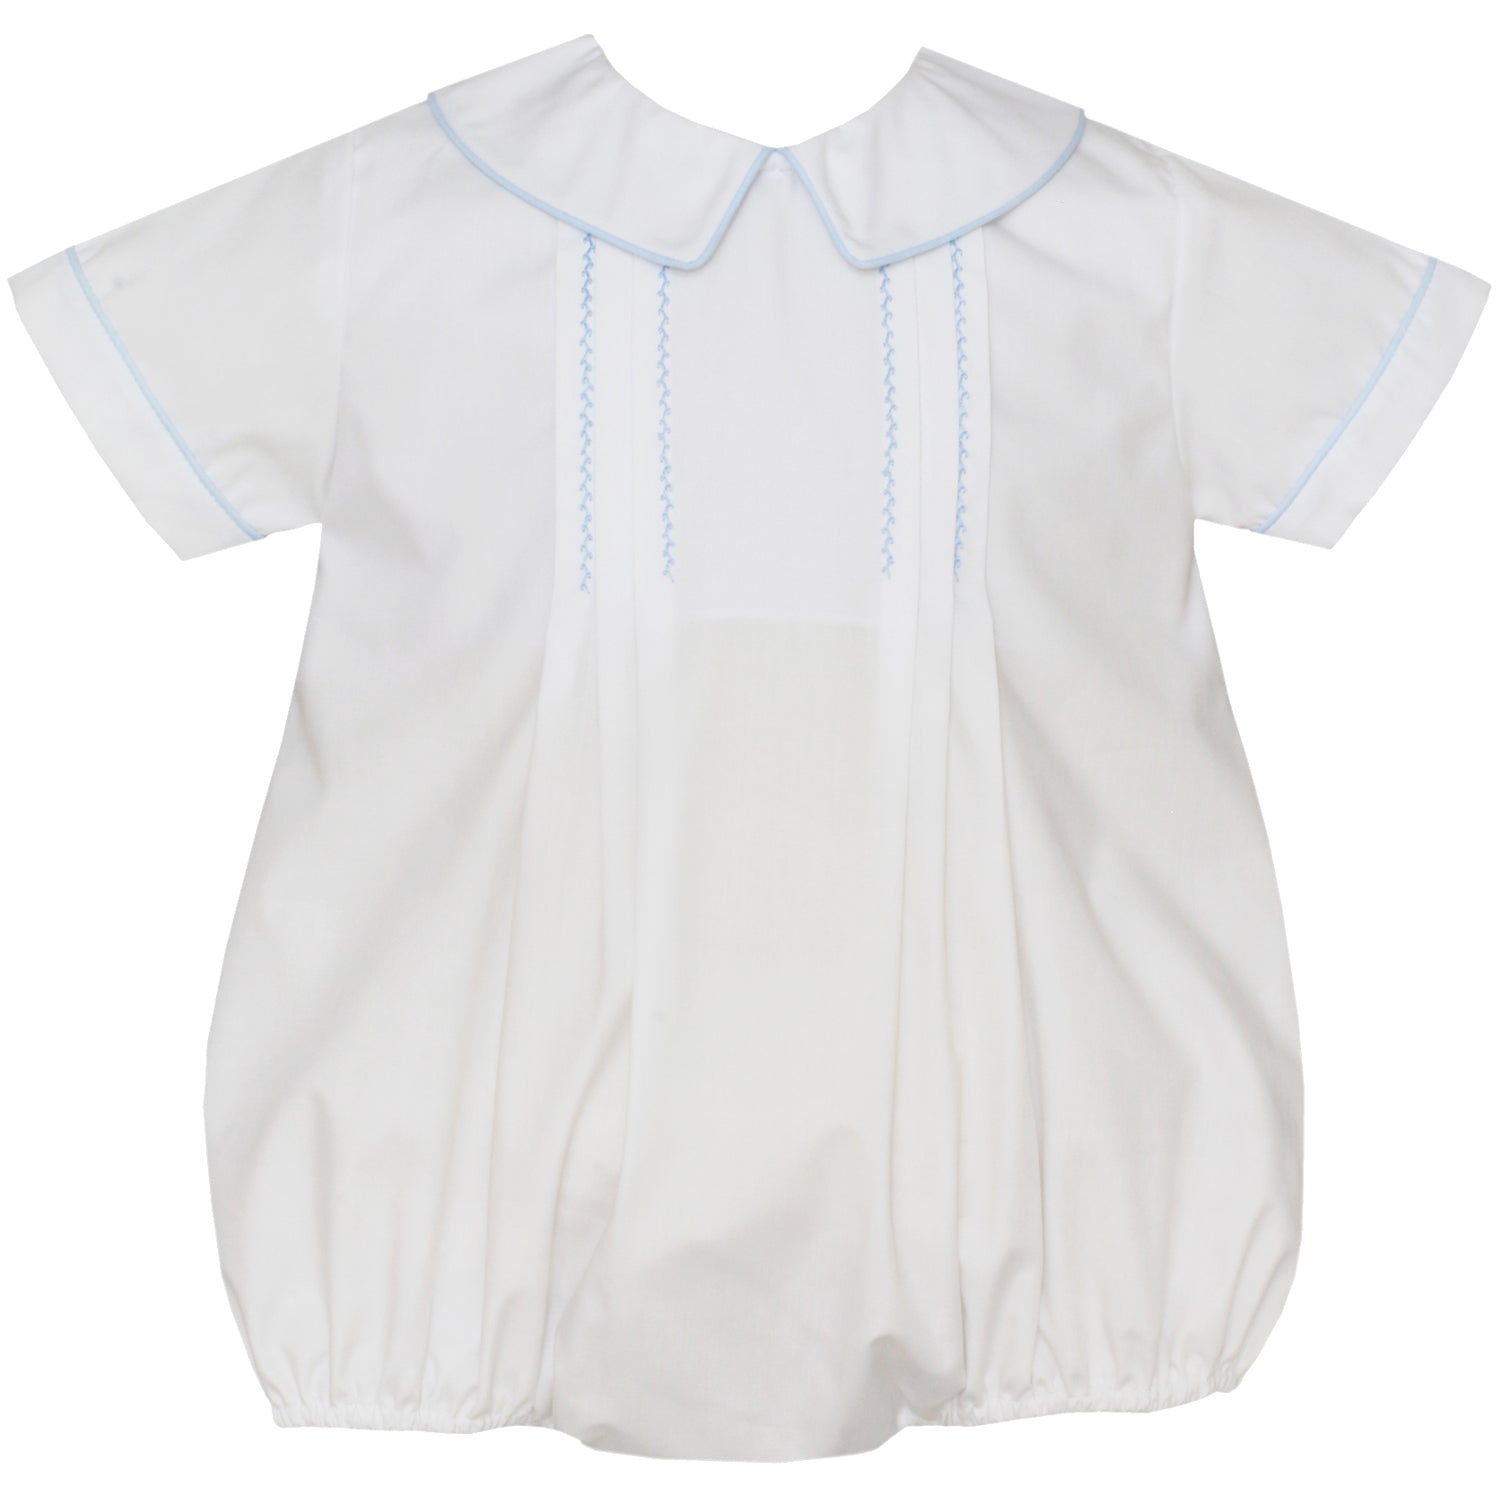 Boy's White Bubble With Collar and Light Blue Smocking